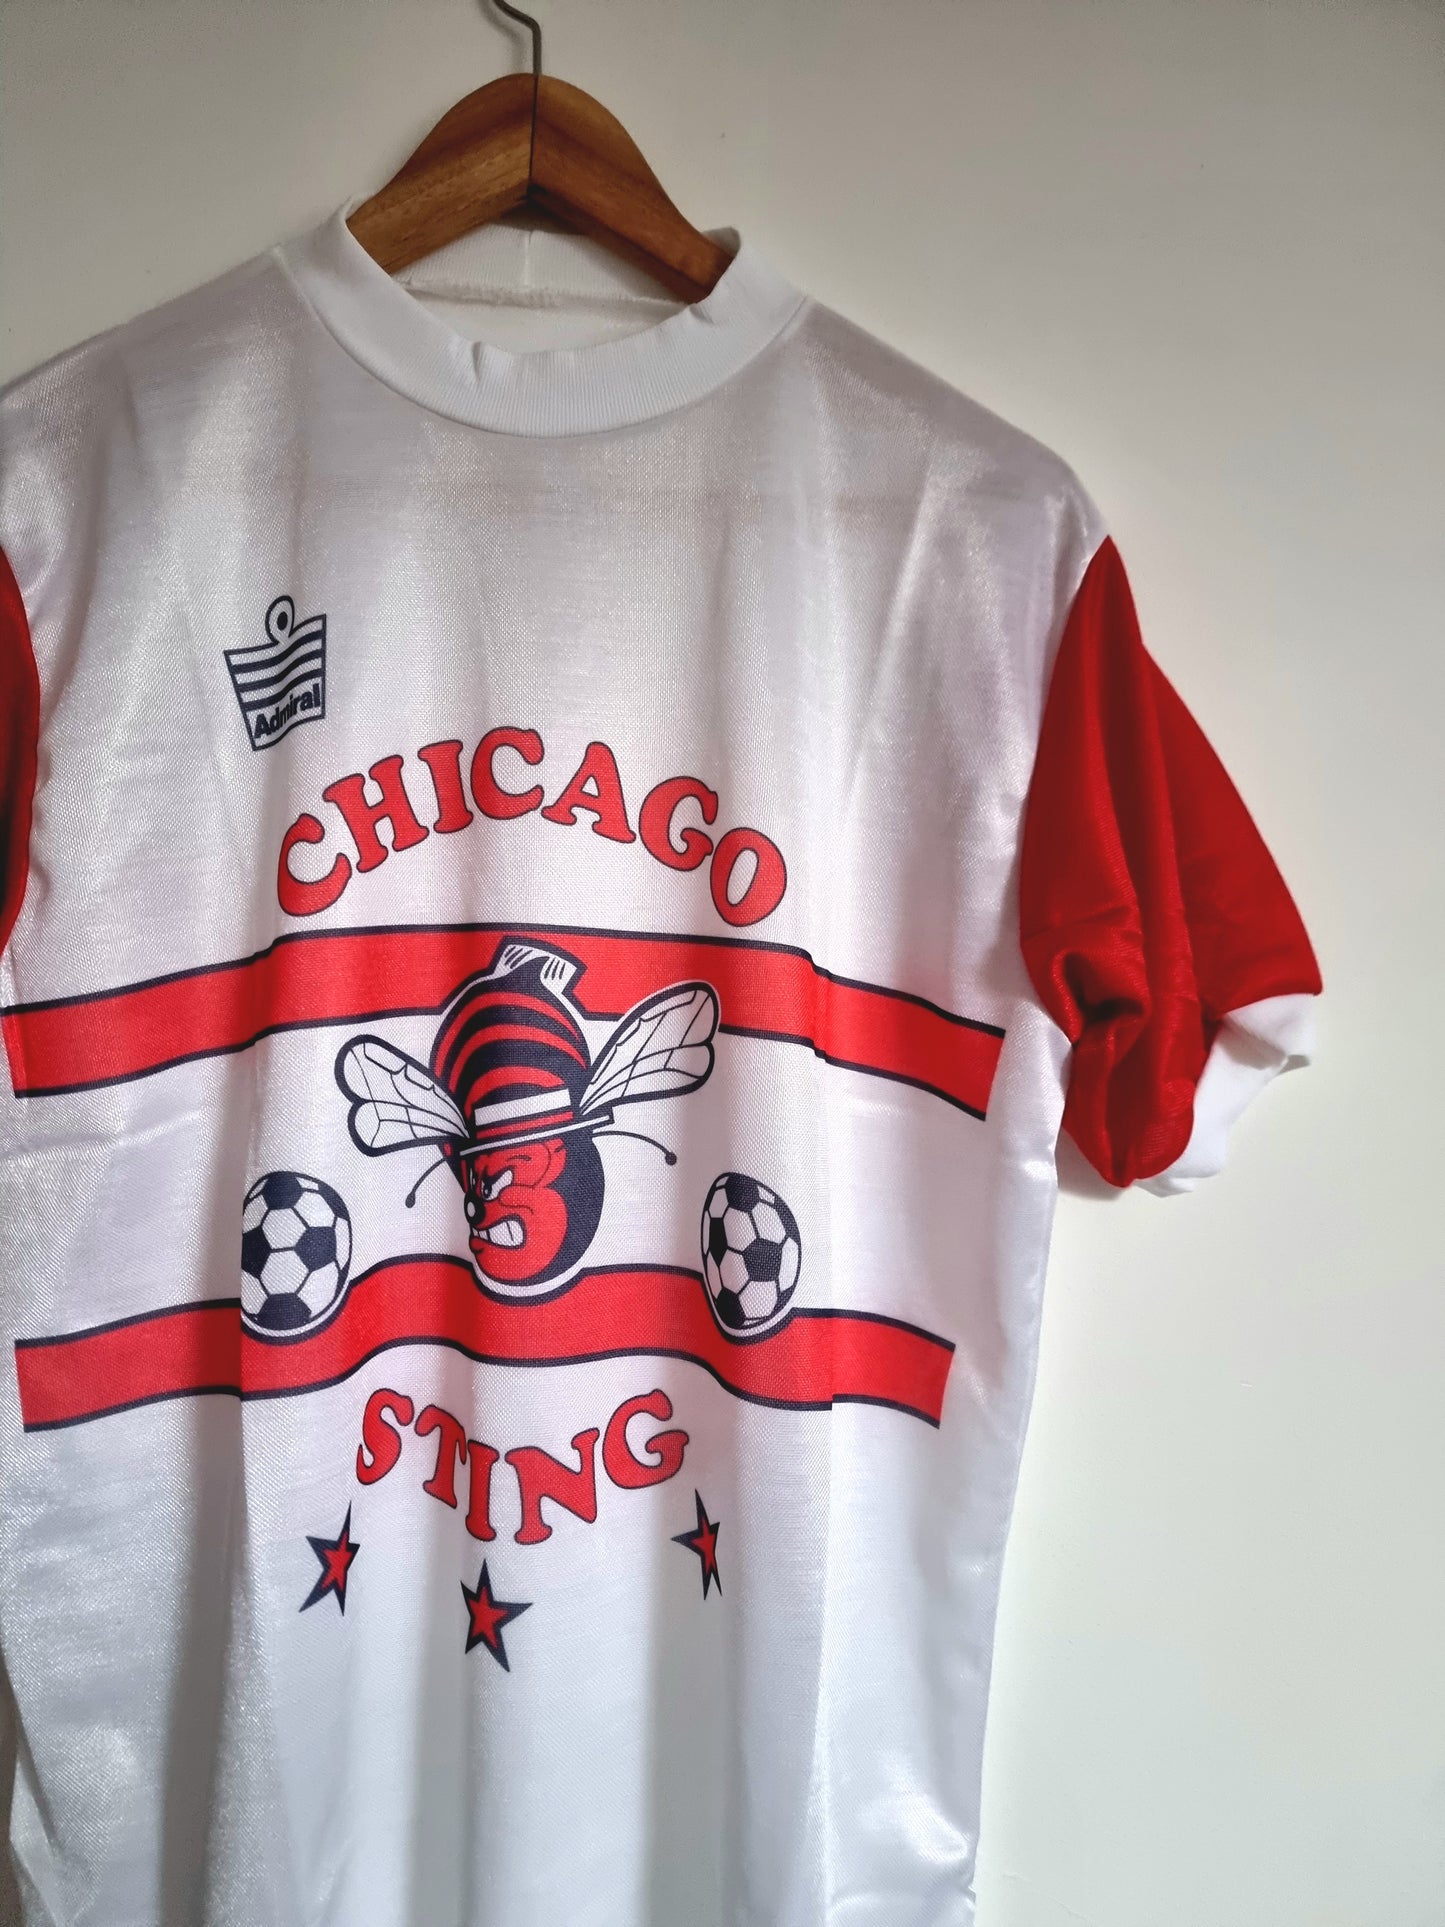 Admiral Chicago Sting 80s Leisure T- Shirt Large